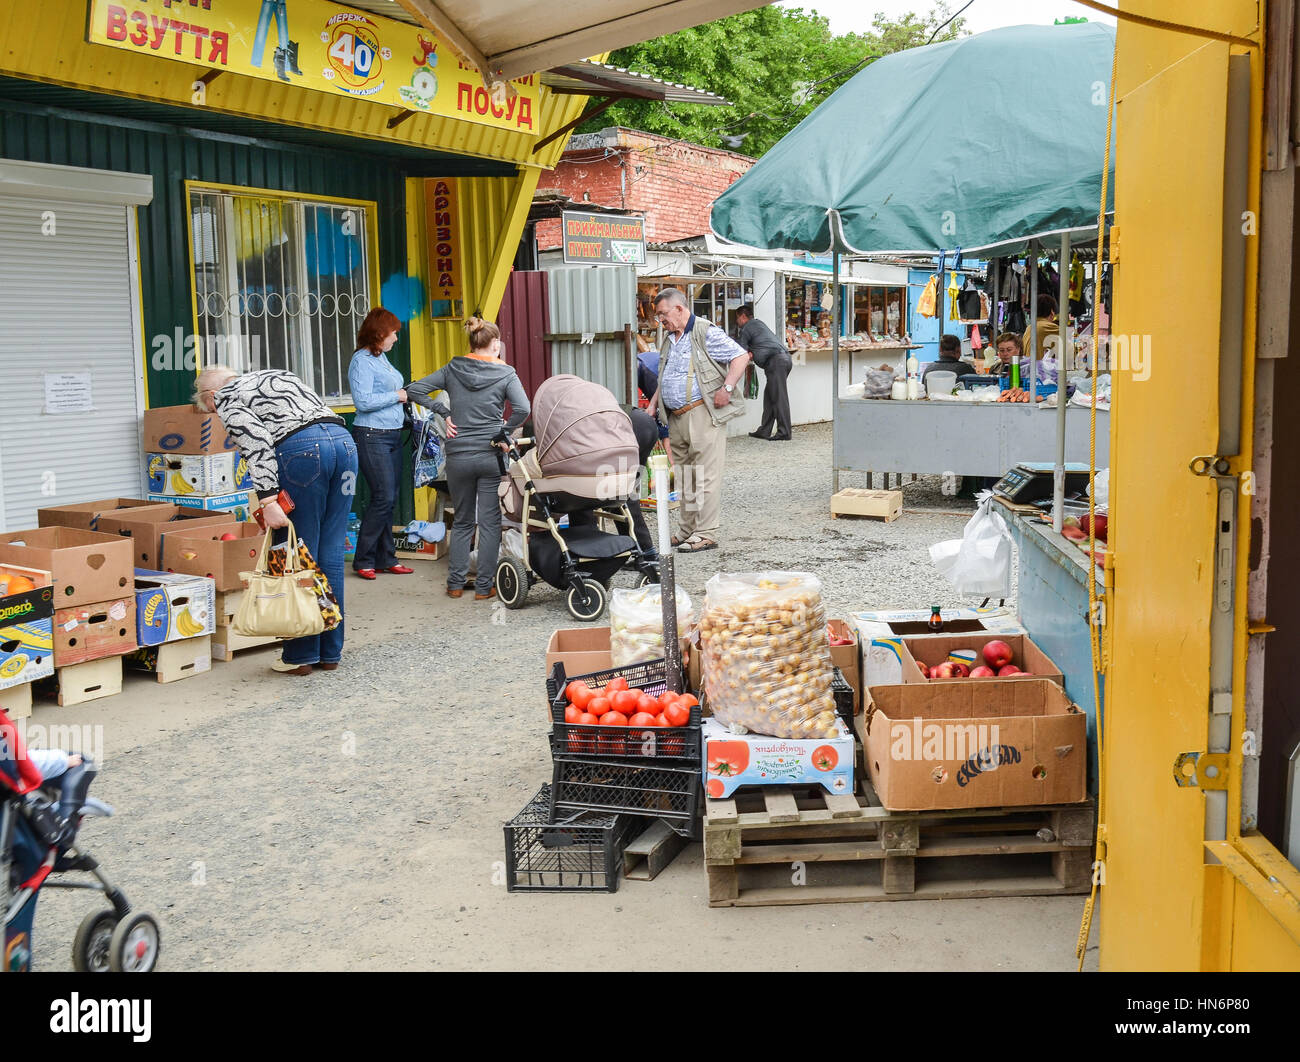 Rivne, Ukraine - May 14, 2013: People at local farmers market or bazaar selling and buying fruits and vegetables Stock Photo